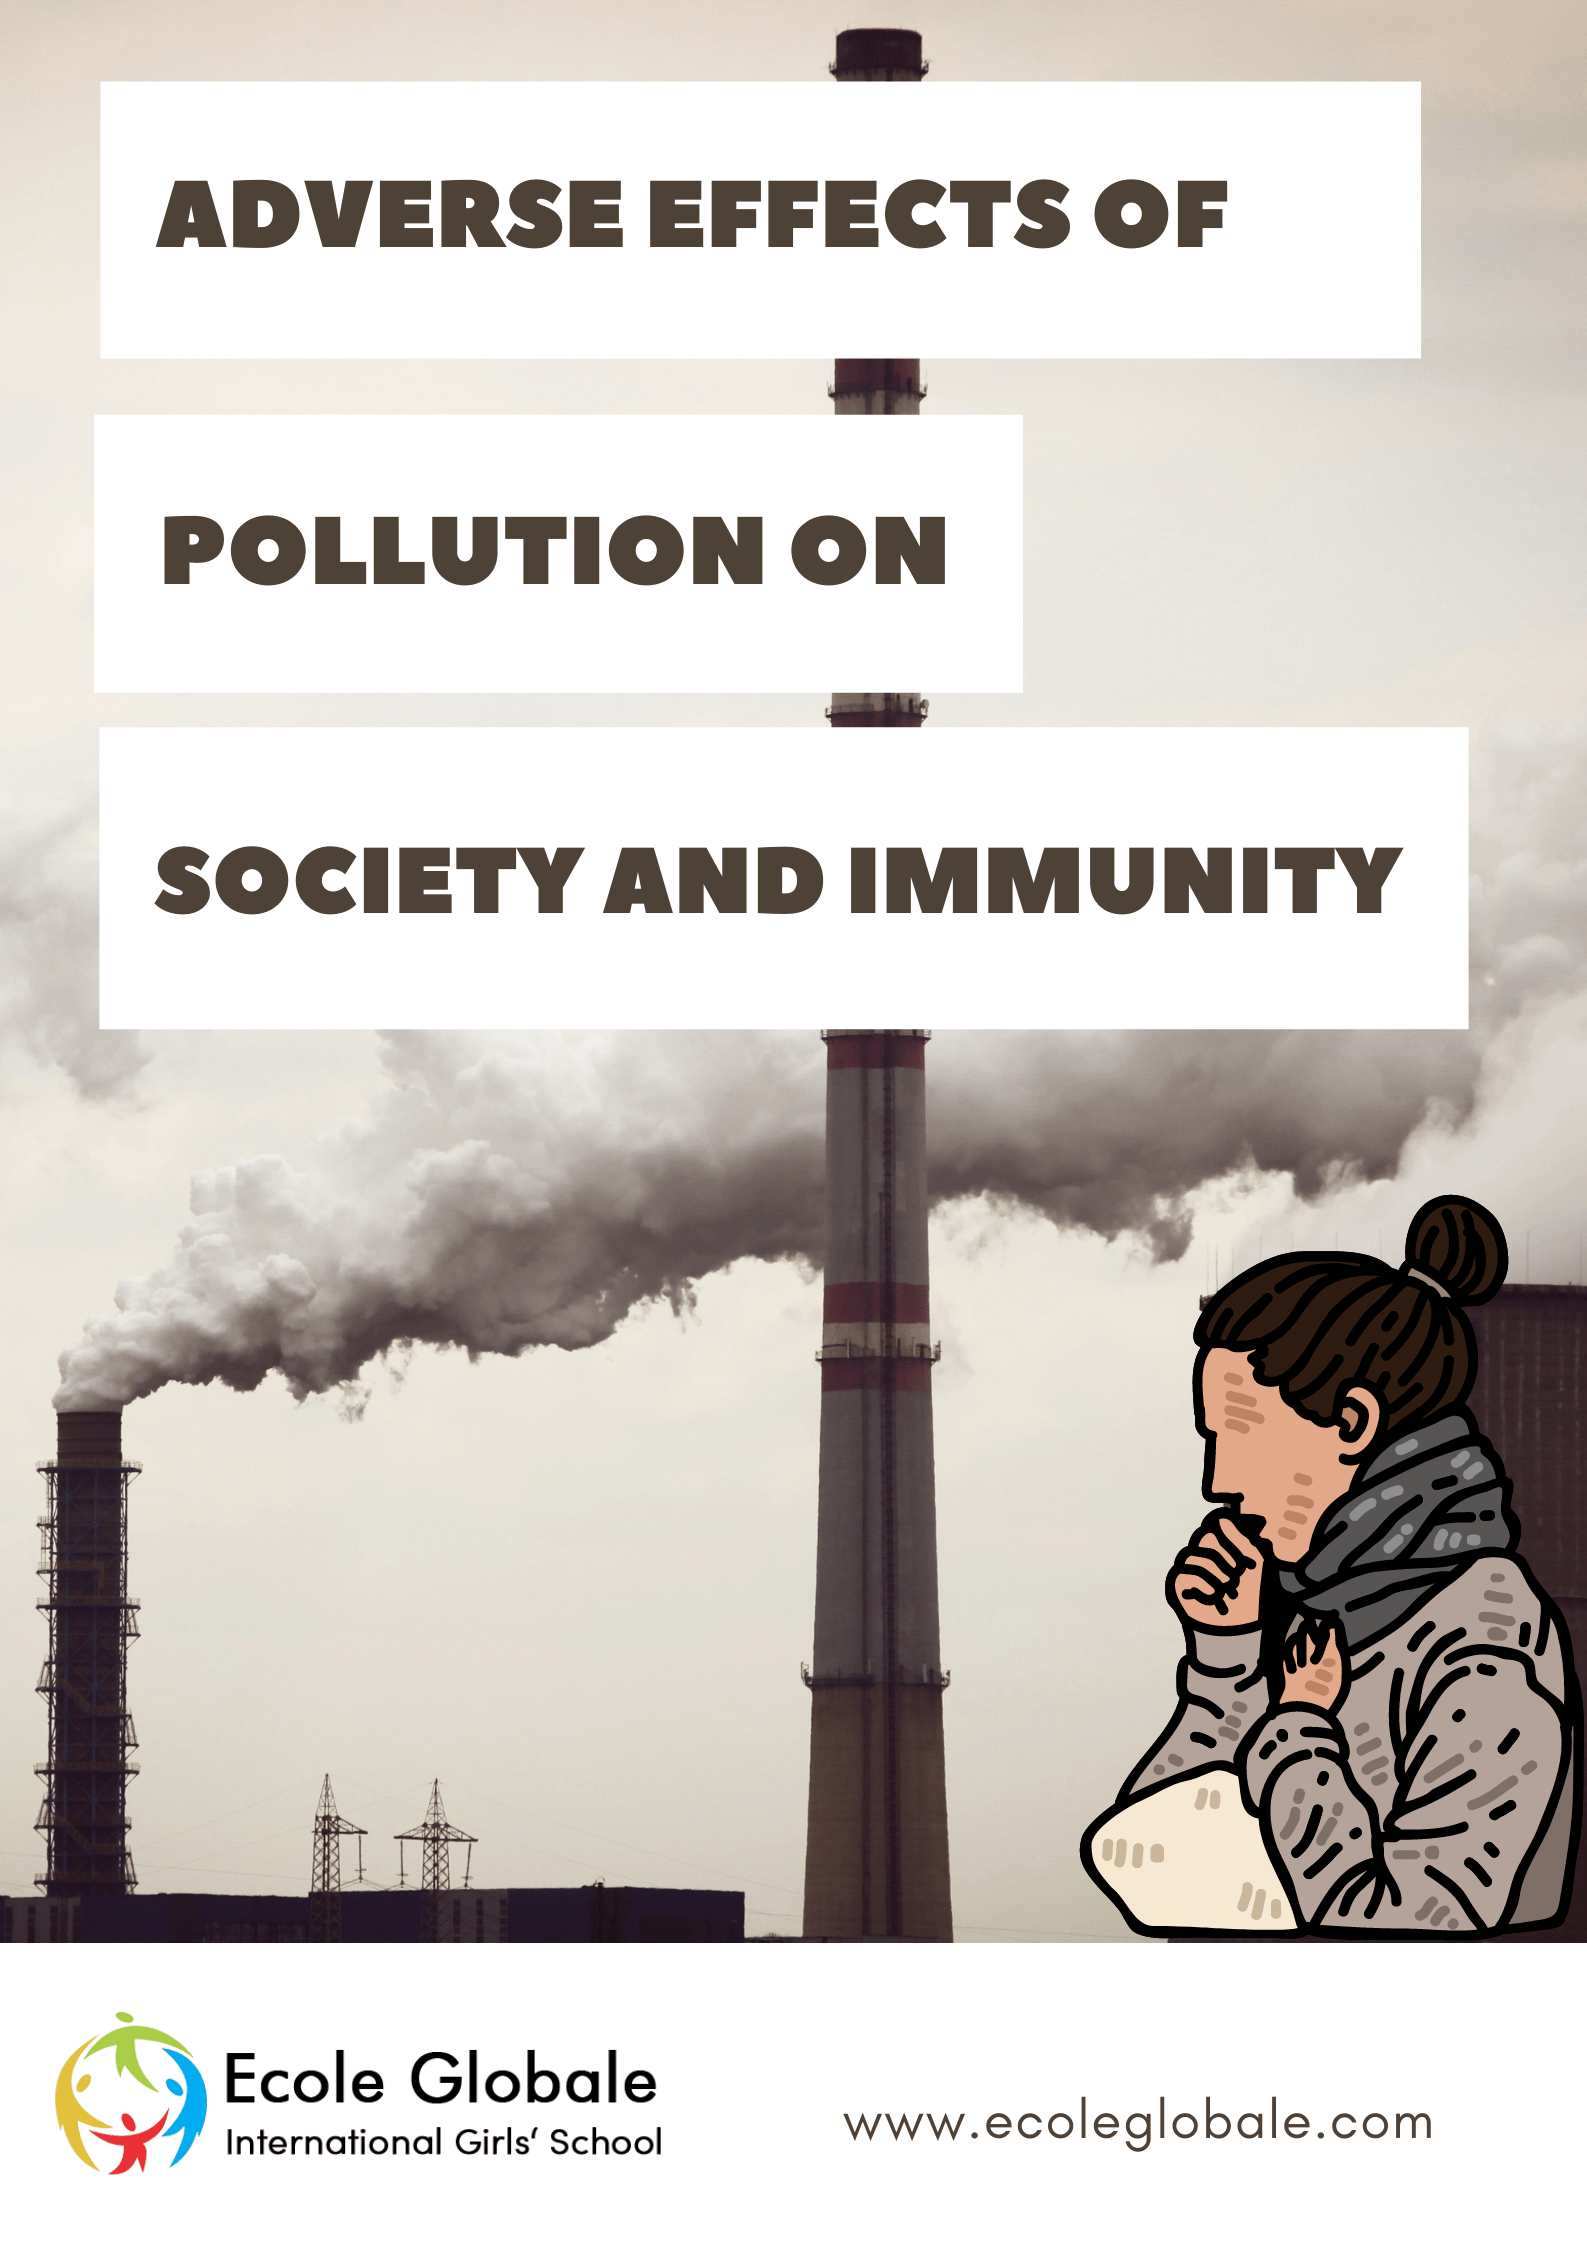 Adverse Effects Of Pollution On Society and Its Immunity